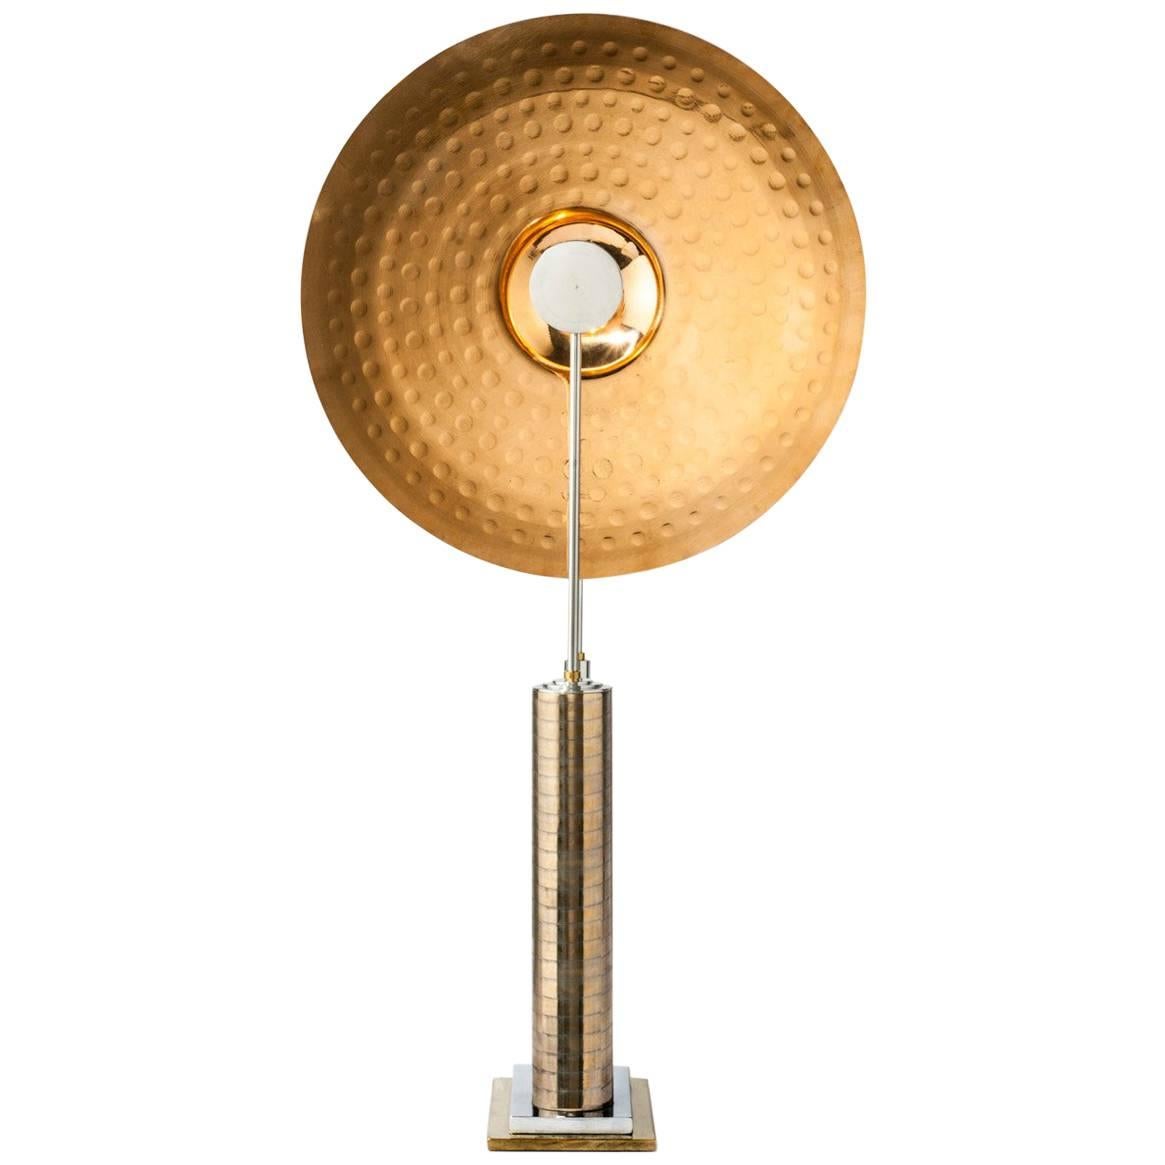 Exceptional Cymbal Table Lamp Sculpture in Brass and Bronze by F de Beauchaine For Sale